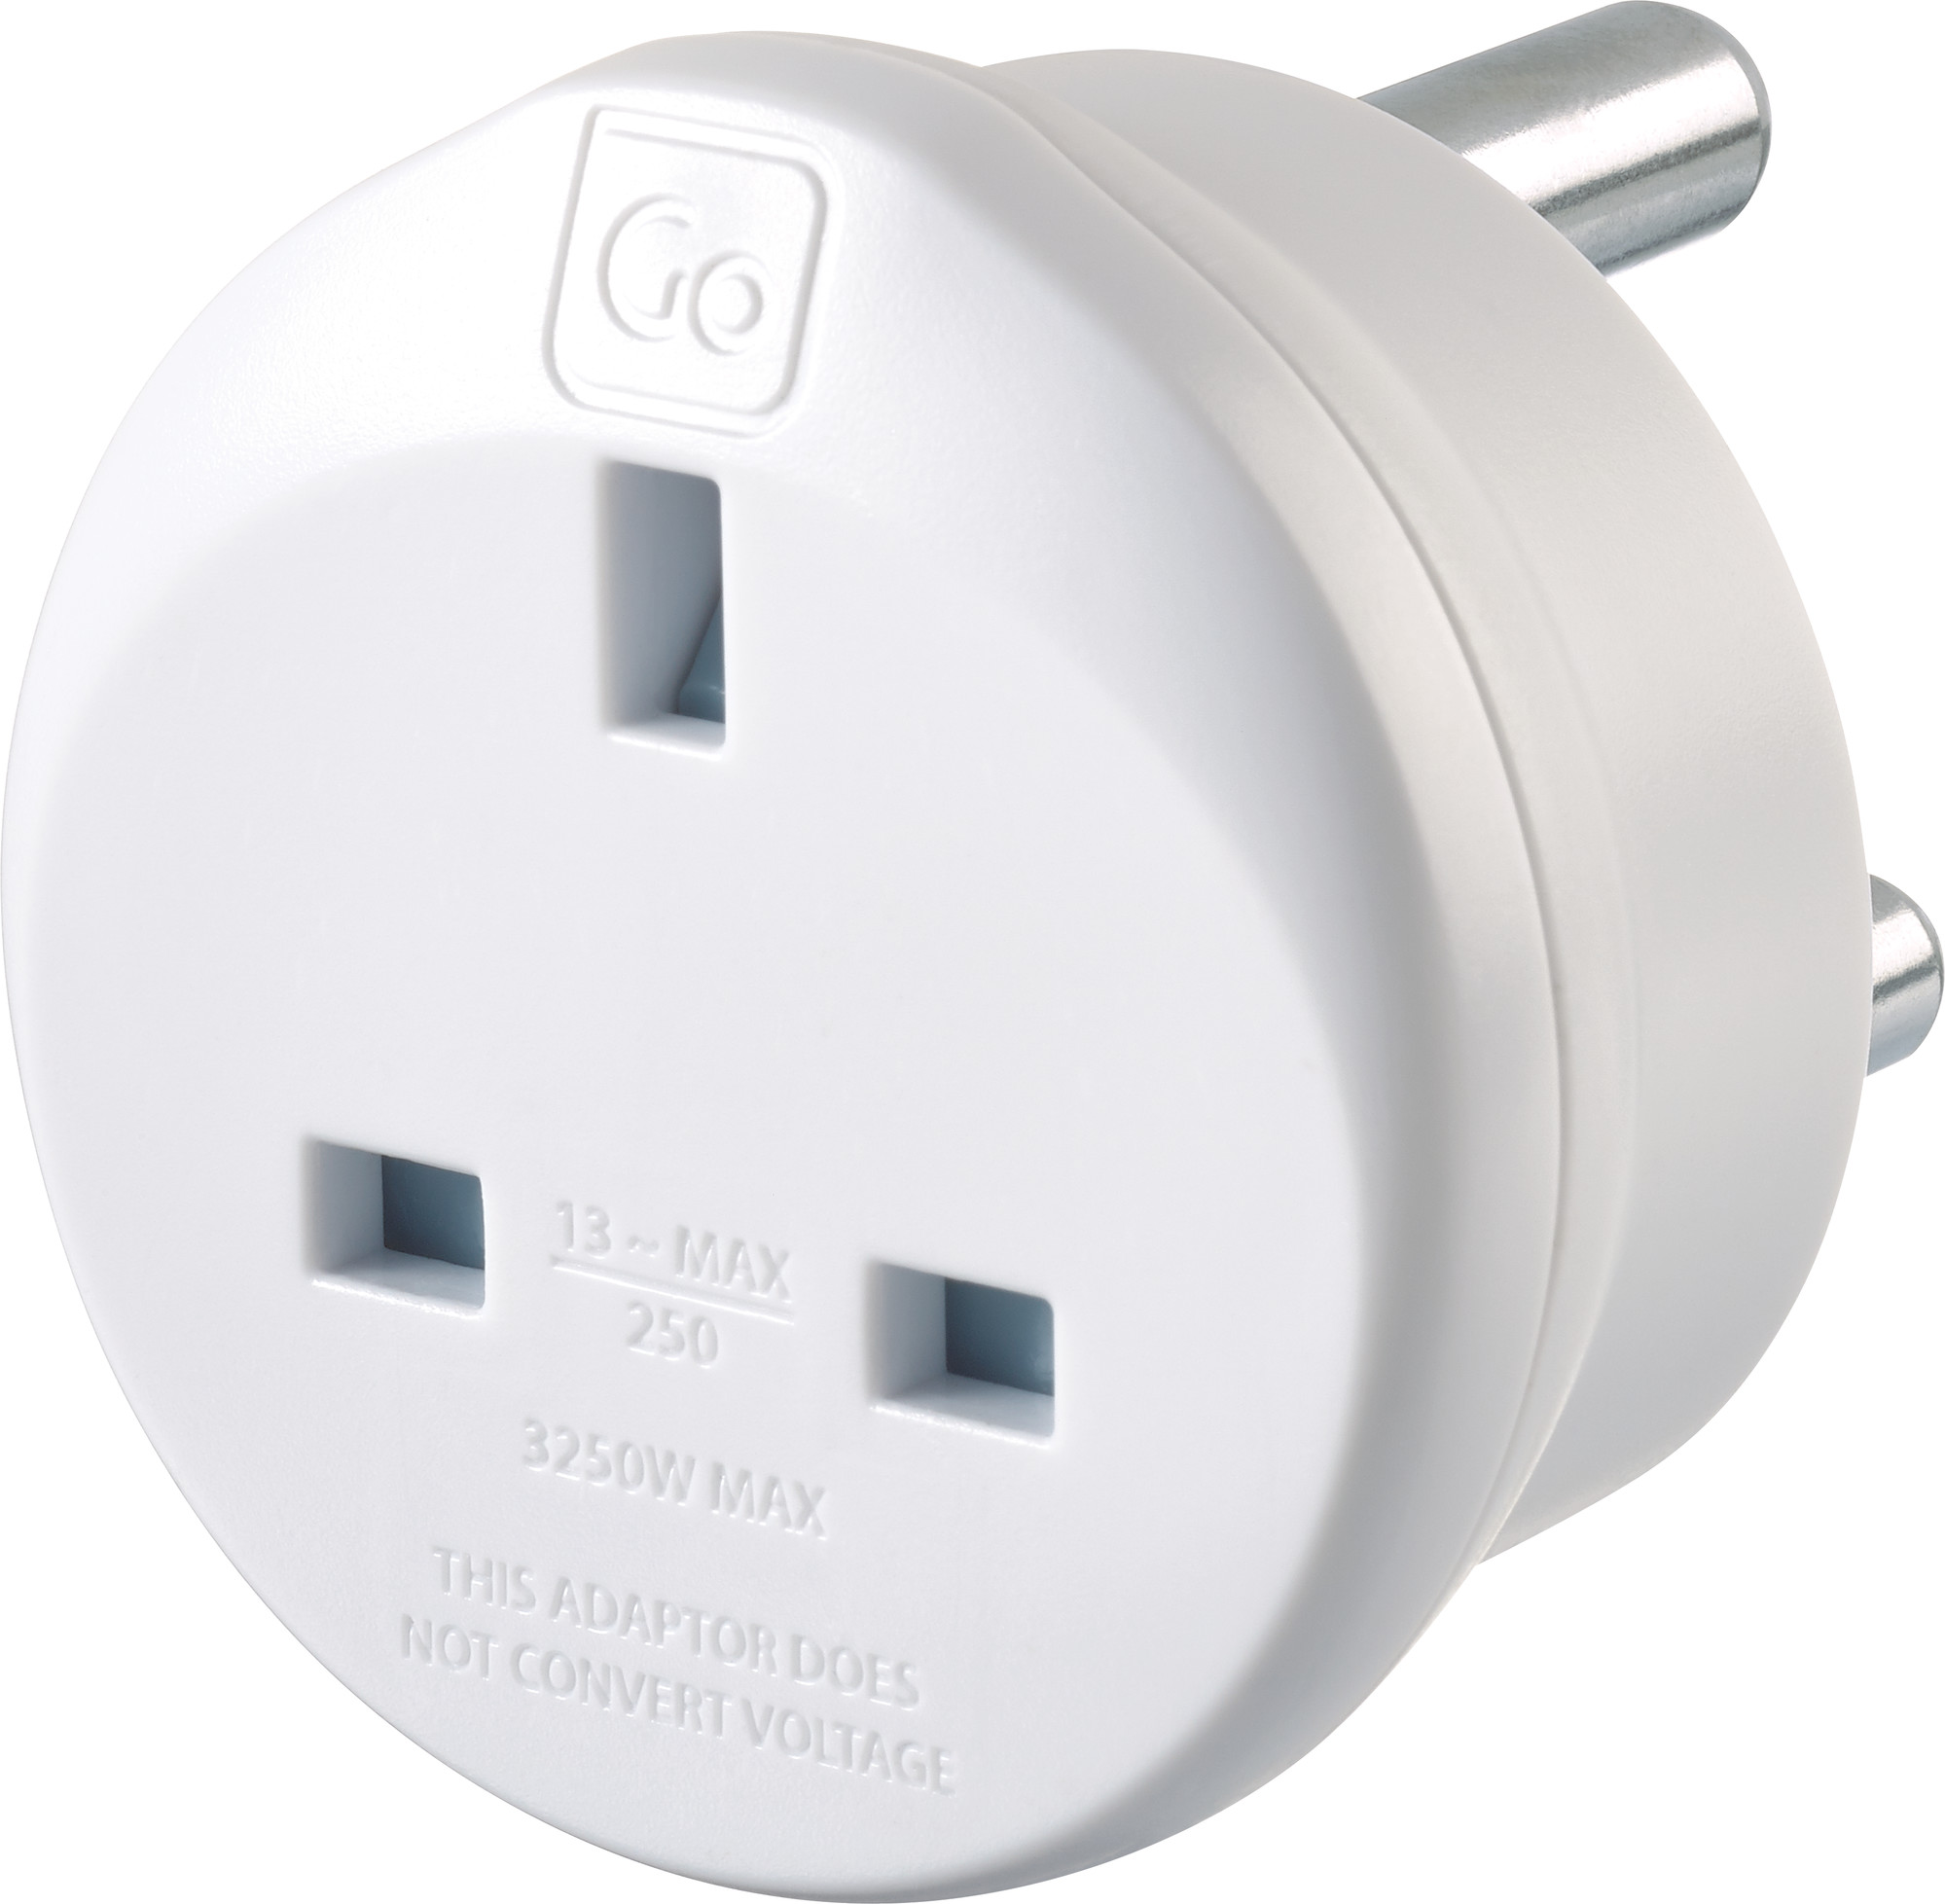 Picture of Go Travel UK SA Adapter